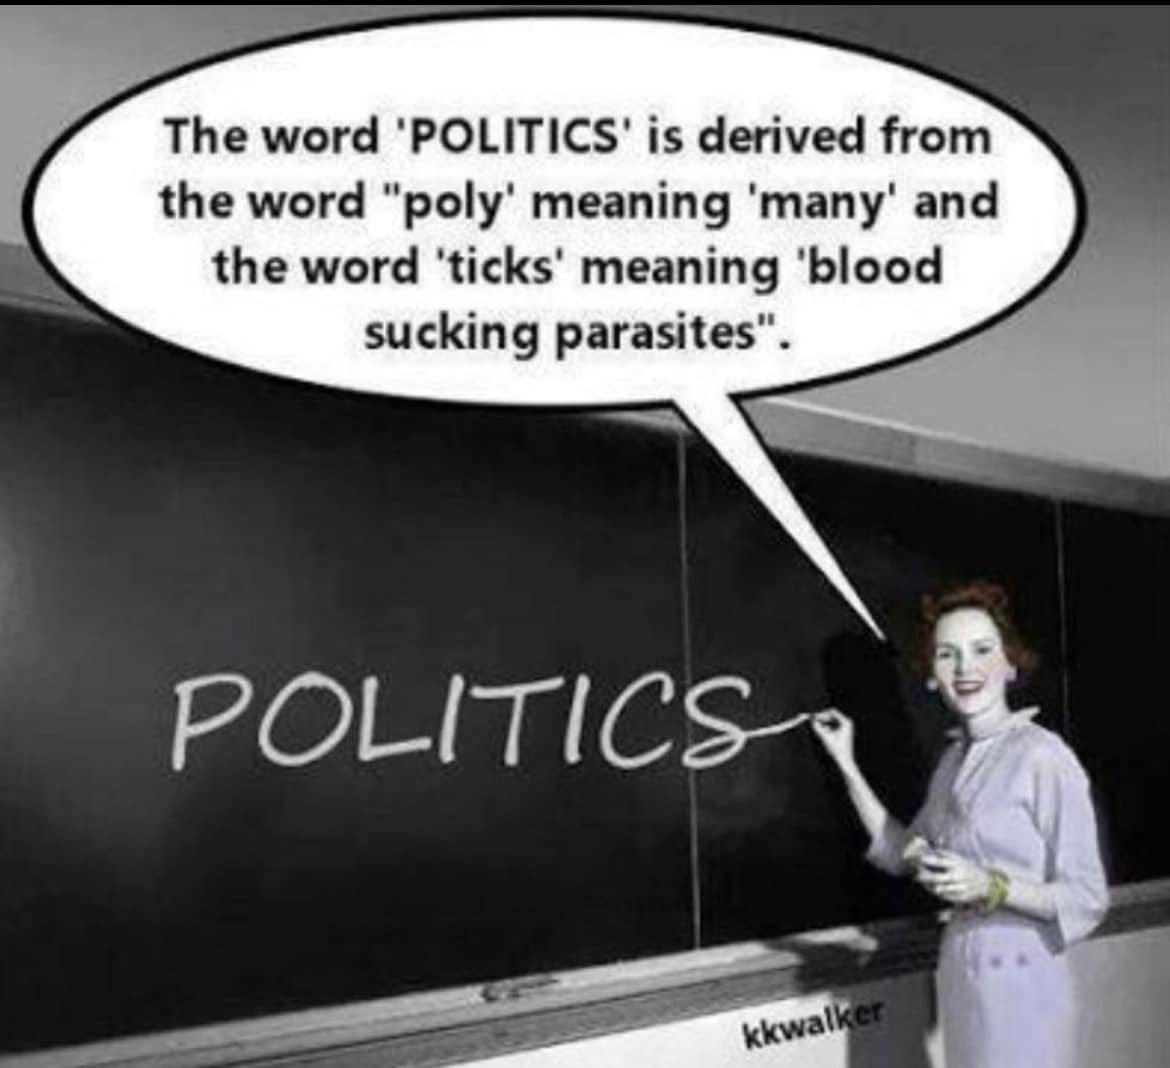 May be an image of 1 person, tick and text that says 'The word 'POLITICS' is derived from the word "poly' meaning many and the word 'ticks' meaning 'blood sucking parasites". POLITICS kkwalk'